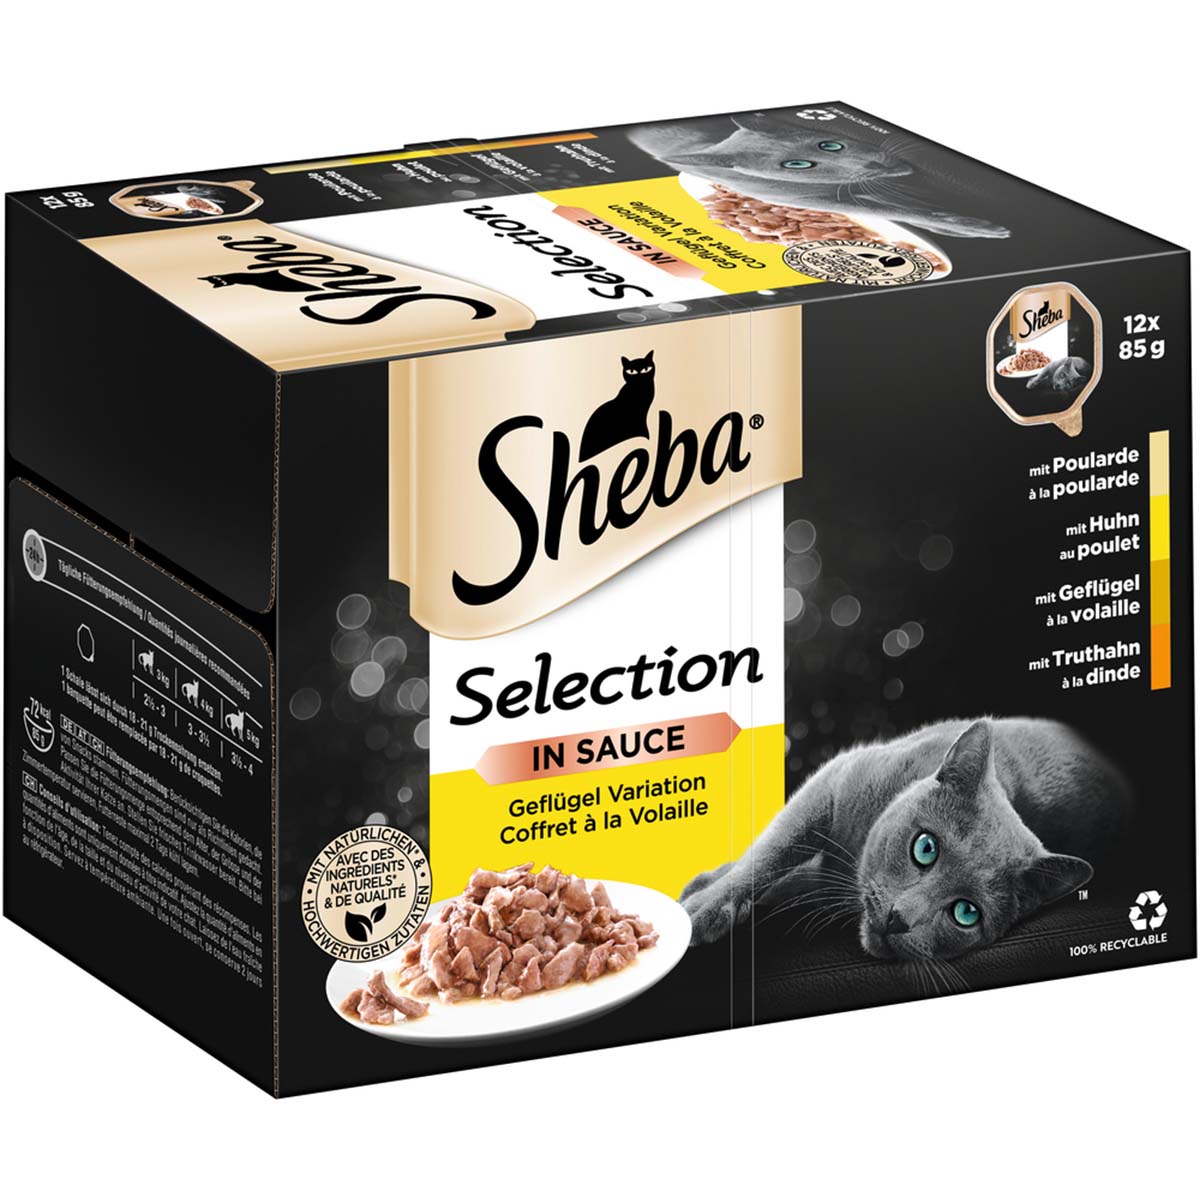 sheba selection in sauce schale multipack 12x85g 1